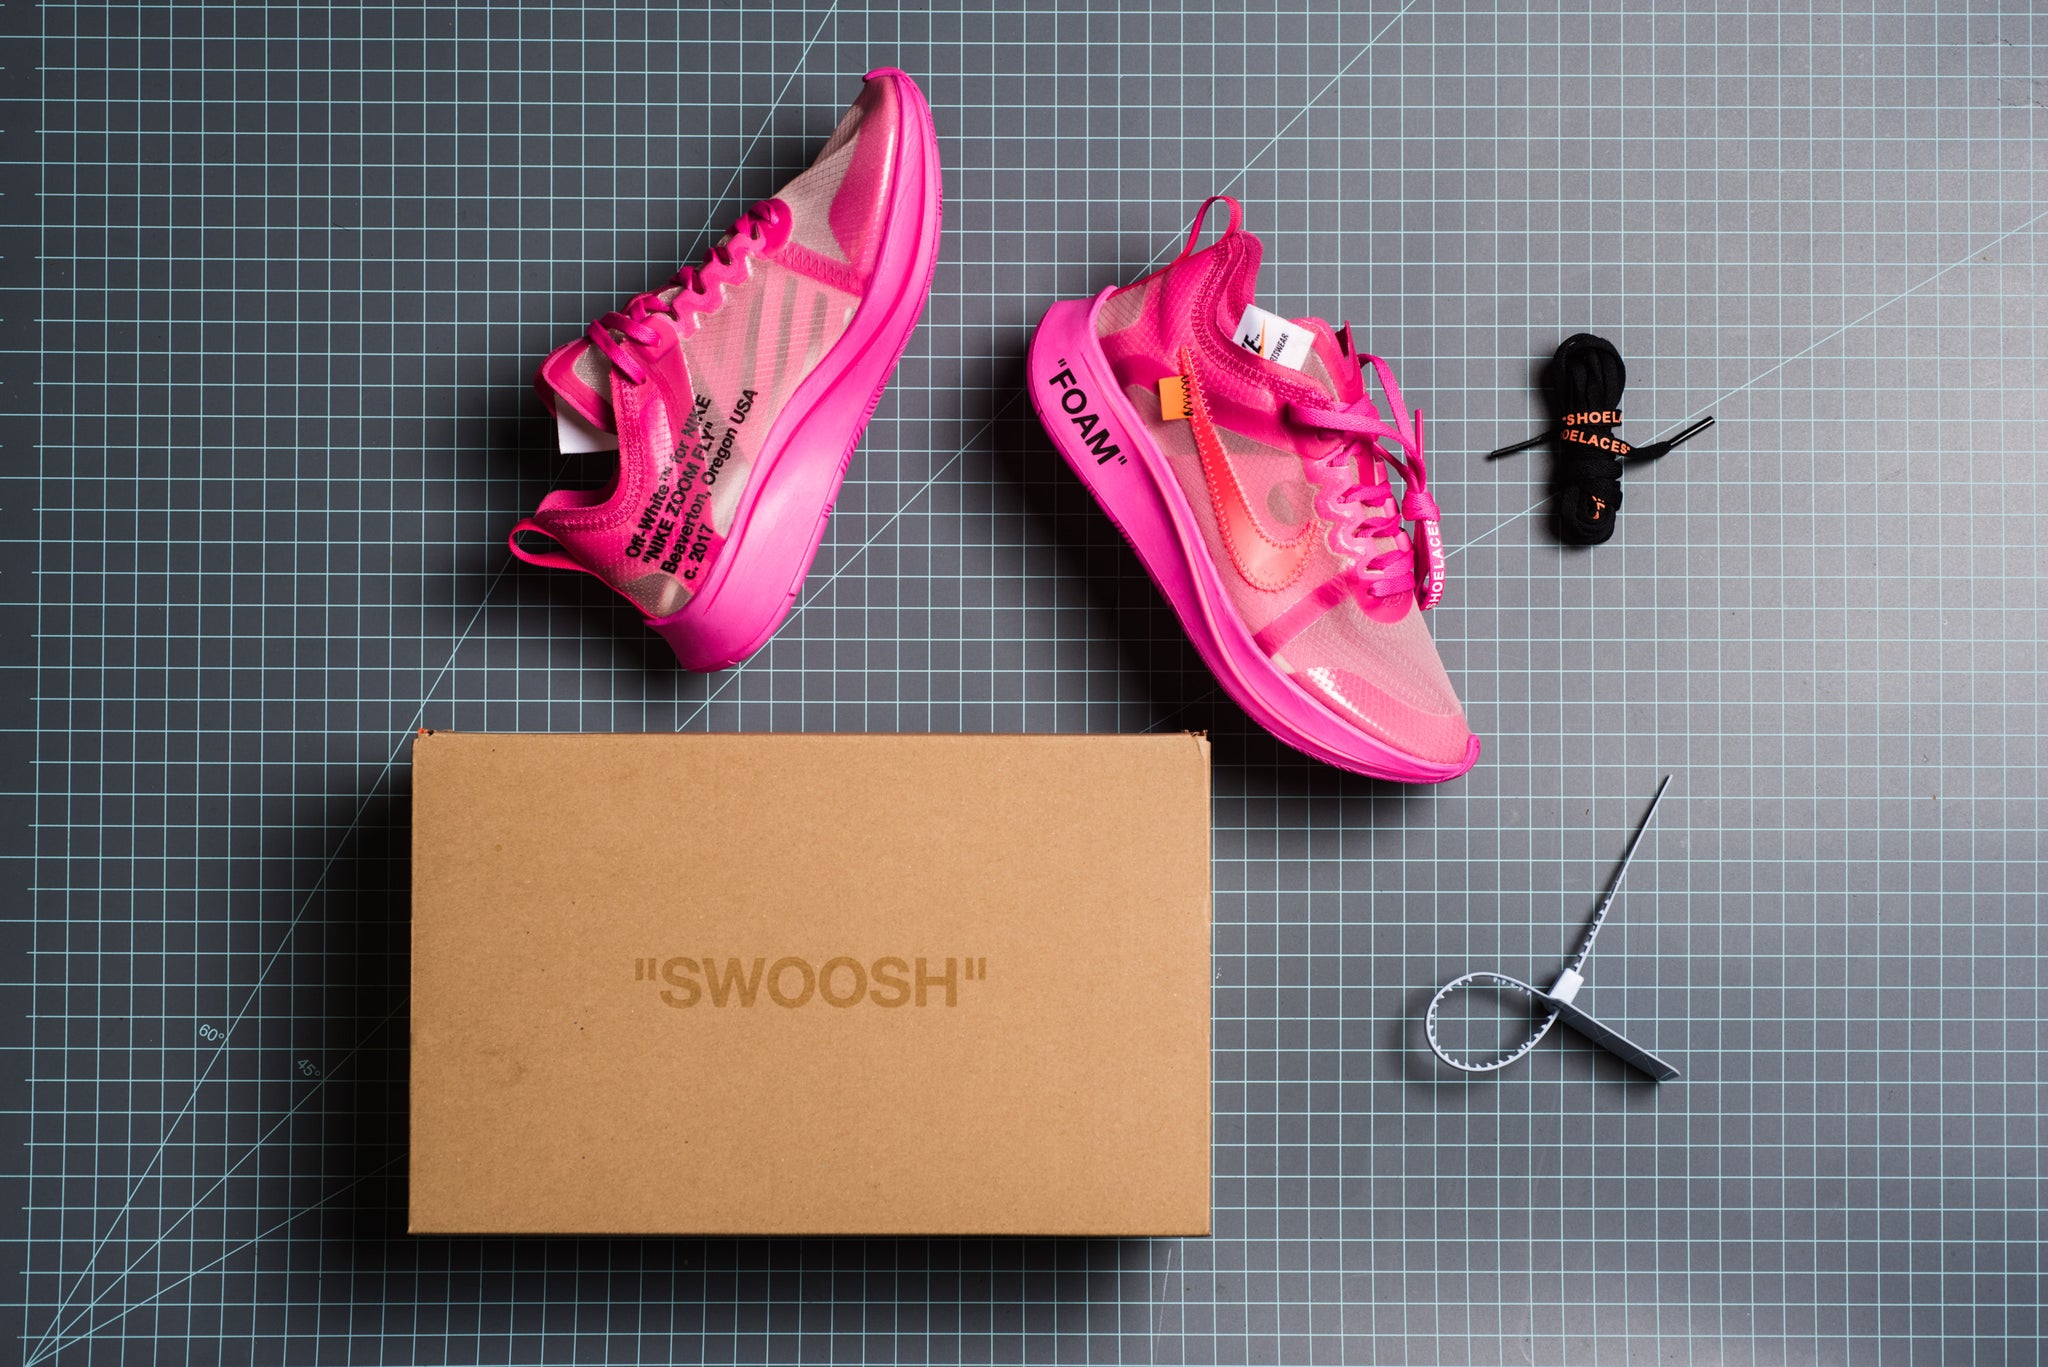 Nike X Off White Zoom Fly the 10 Sneakers - Pink